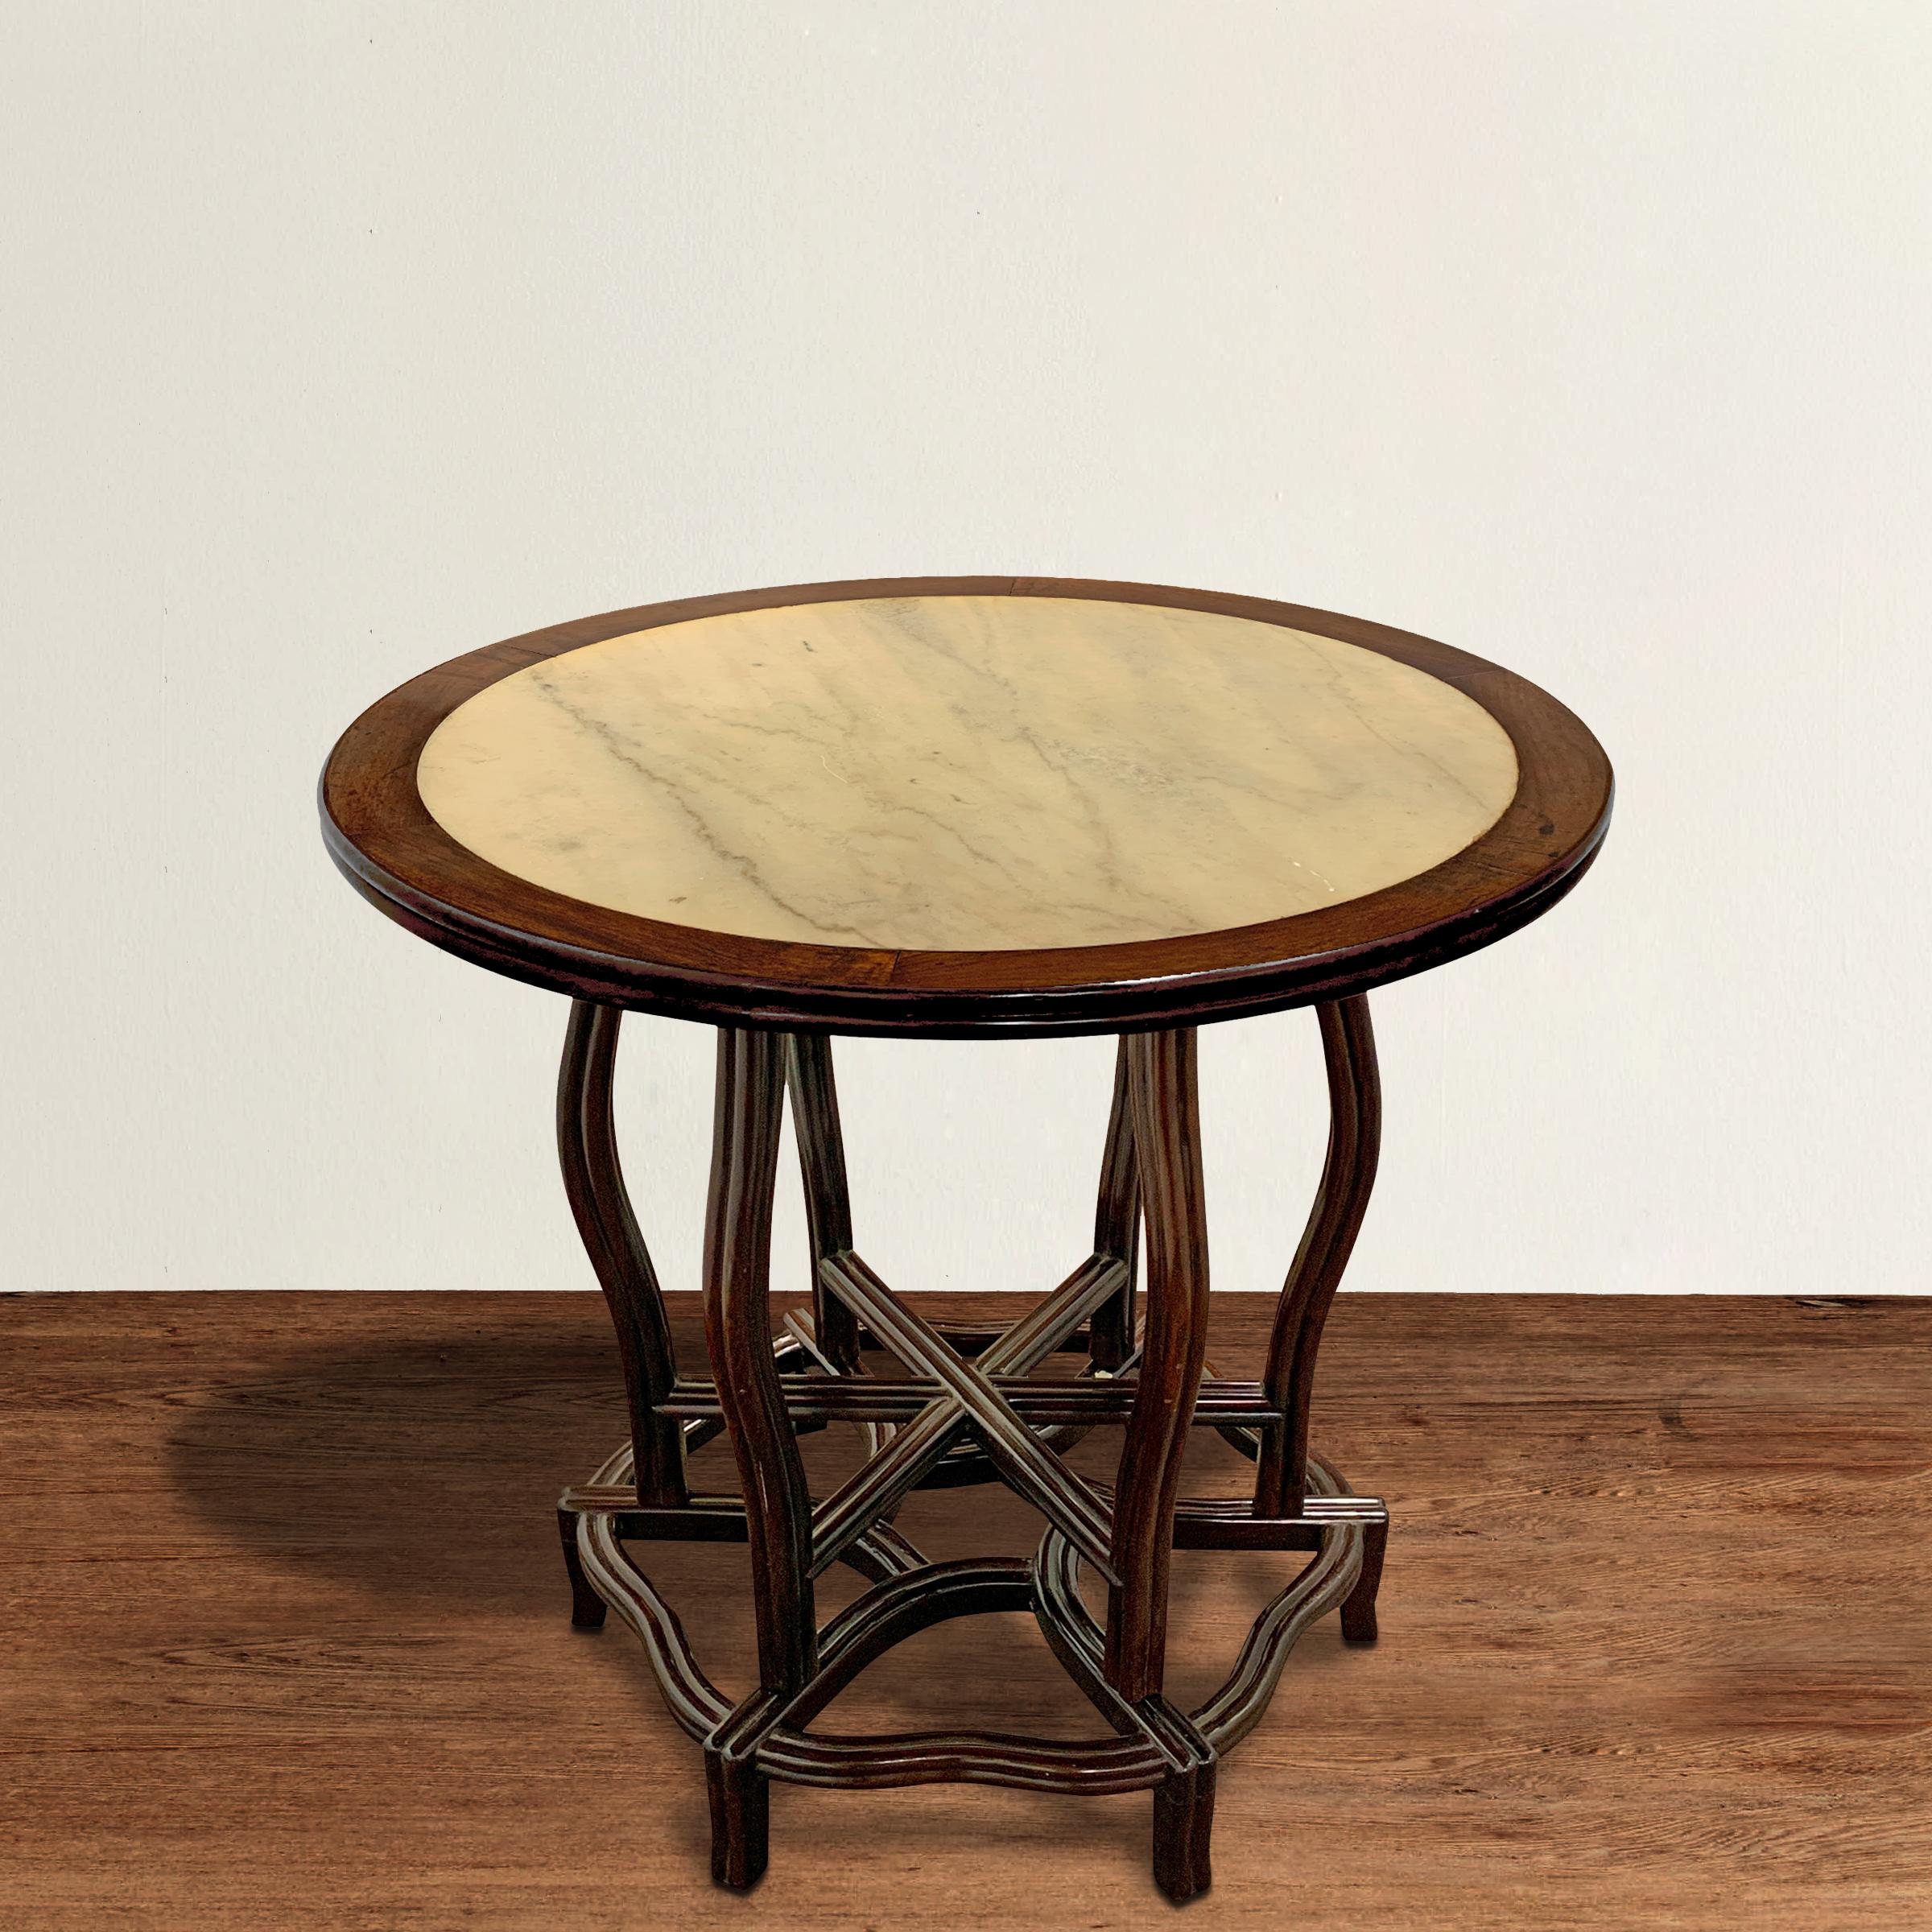 An incredible Chinese Art Deco center table with a rosewood frame designed to mimic a peony, and a marble inset top. The top and base come apart from the central frame to allow for easy transport. This table would be perfect as a center table,